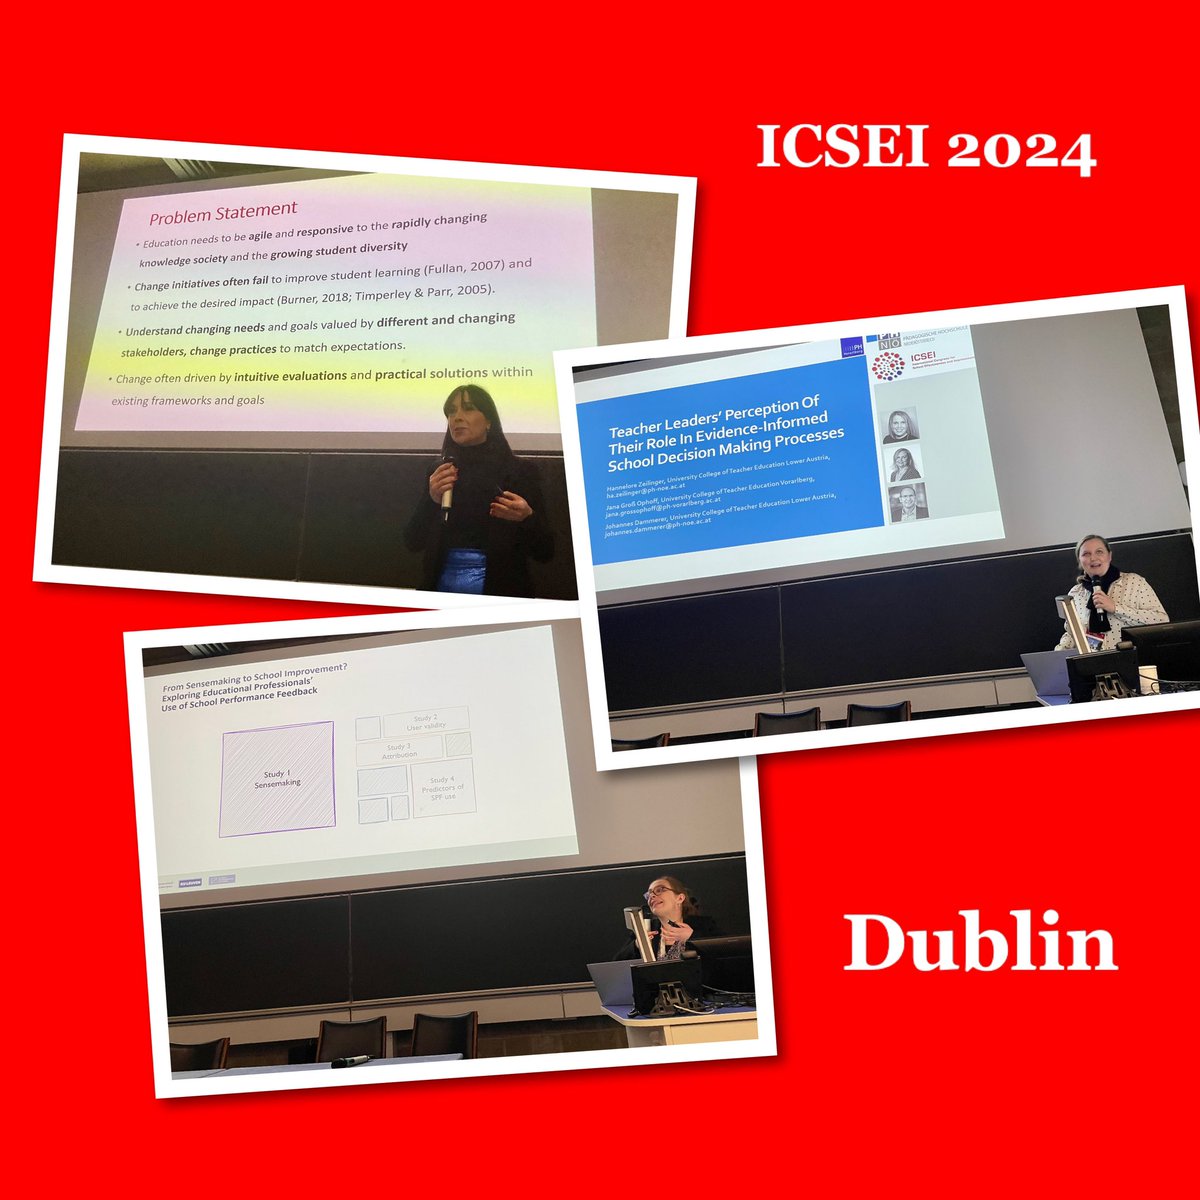 I had the pleasure to be discussant in a session with wonderful presentations by @VanlommelK @evelyngoffin @JanaGrossOphoff on evidence use (data, research, professional judgement), sense making and quality care coordinators to support evidence use @ICSEIglobal #ICSEI2024